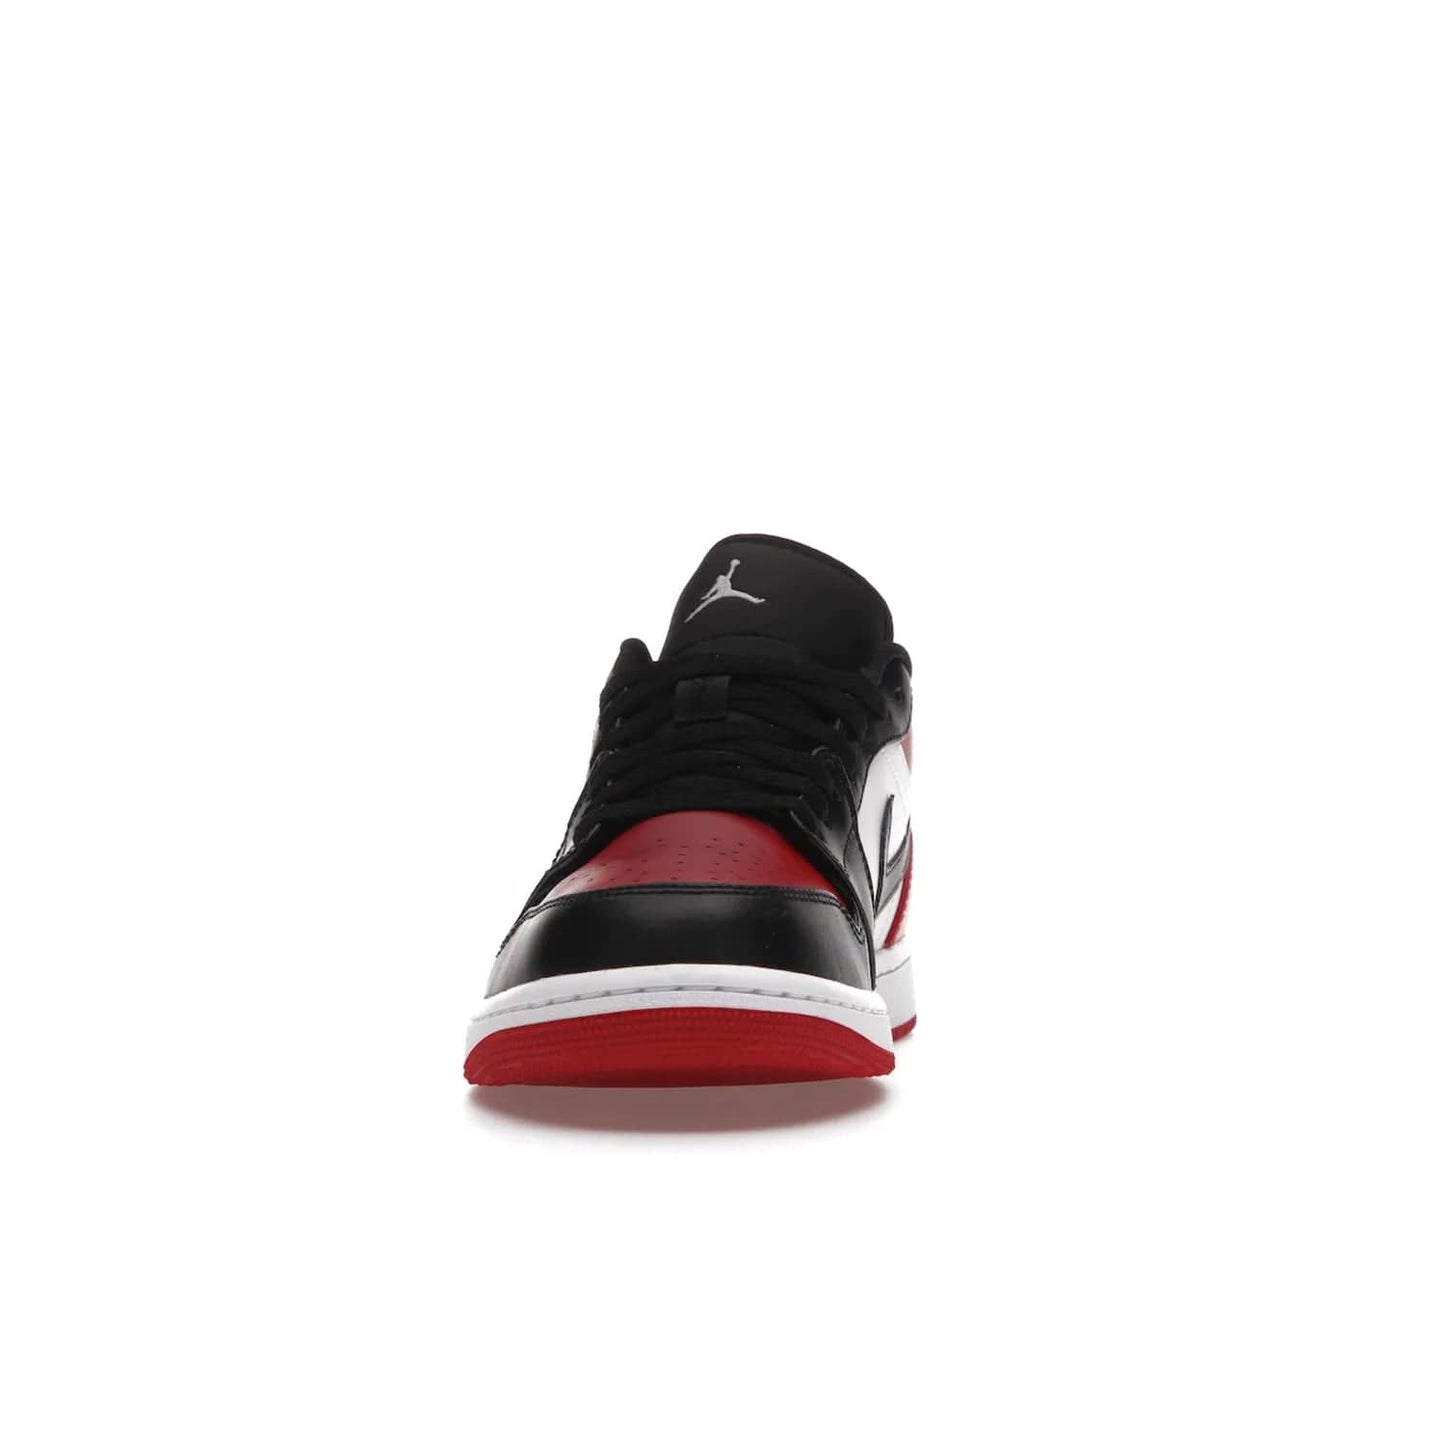 Jordan 1 Low Bred Toe - Image 11 - Only at www.BallersClubKickz.com - Step into the iconic Jordan 1 Retro. Mixing and matching of leather in red, black, and white makes for a unique colorway. Finished off with a Wing logo embroidery & Jumpman label. Comfortable and stylish at an affordable $100, the Jordan 1 Low Bred Toe is perfect for any true sneaker fan.